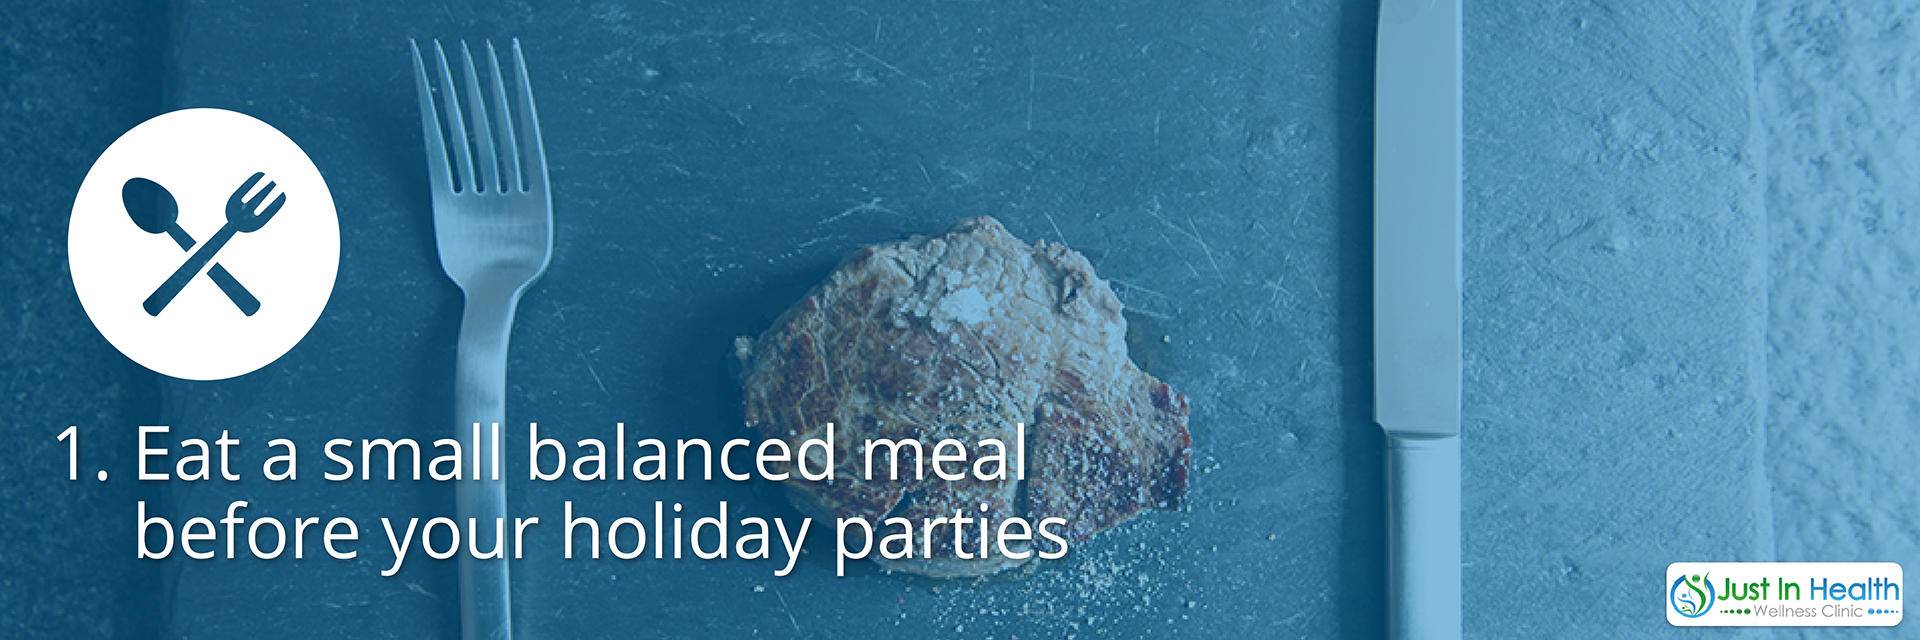 Eat Small Balanced Meals Before Holiday Parties